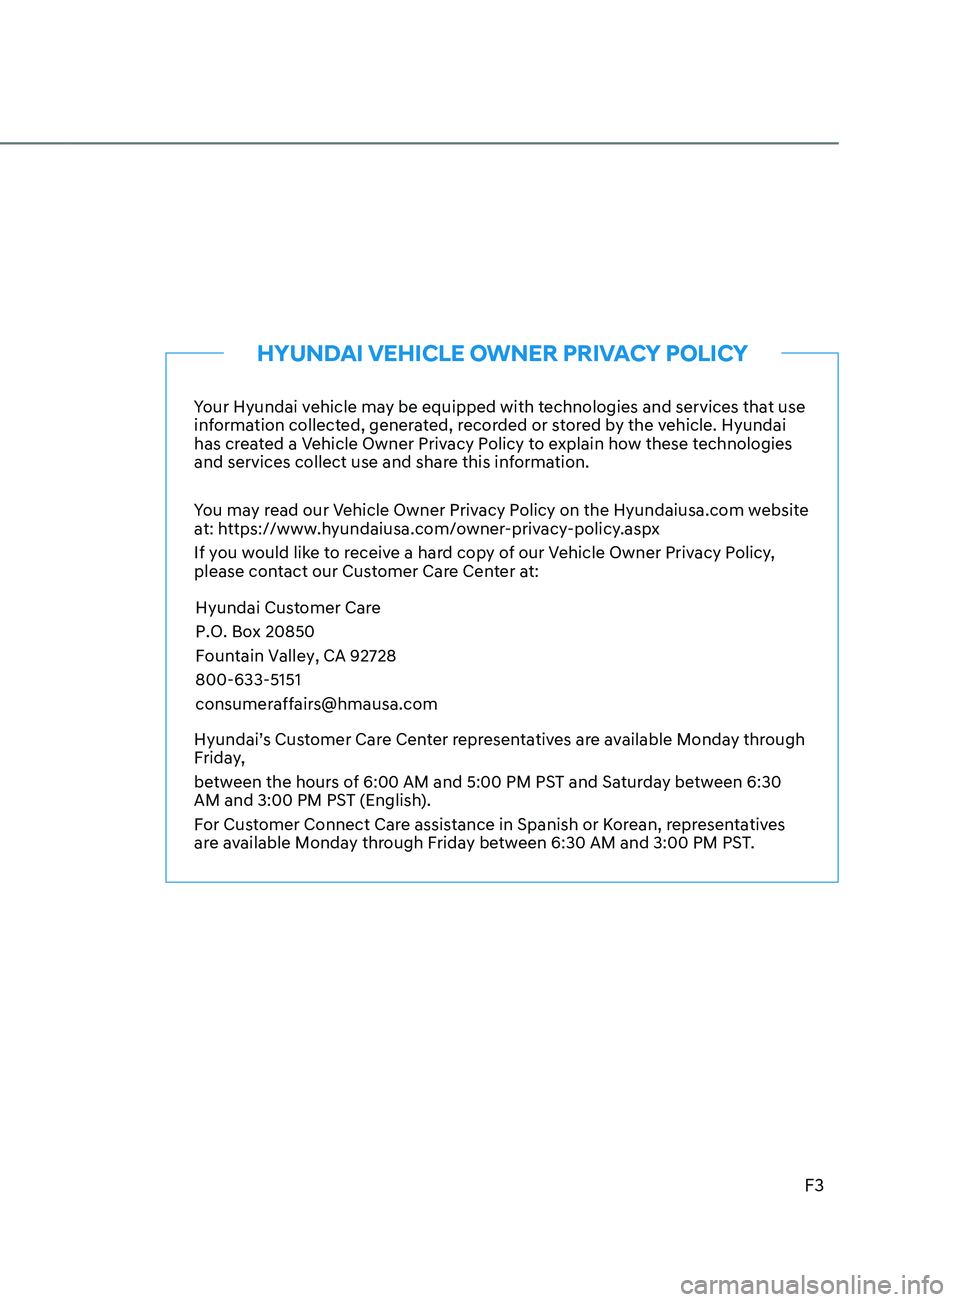 HYUNDAI ELANTRA 2021  Owners Manual F3
Your Hyundai vehicle may be equipped with technologies and services that use 
information collected, generated, recorded or stored by the vehicle. Hyundai 
has created a Vehicle Owner Privacy Polic